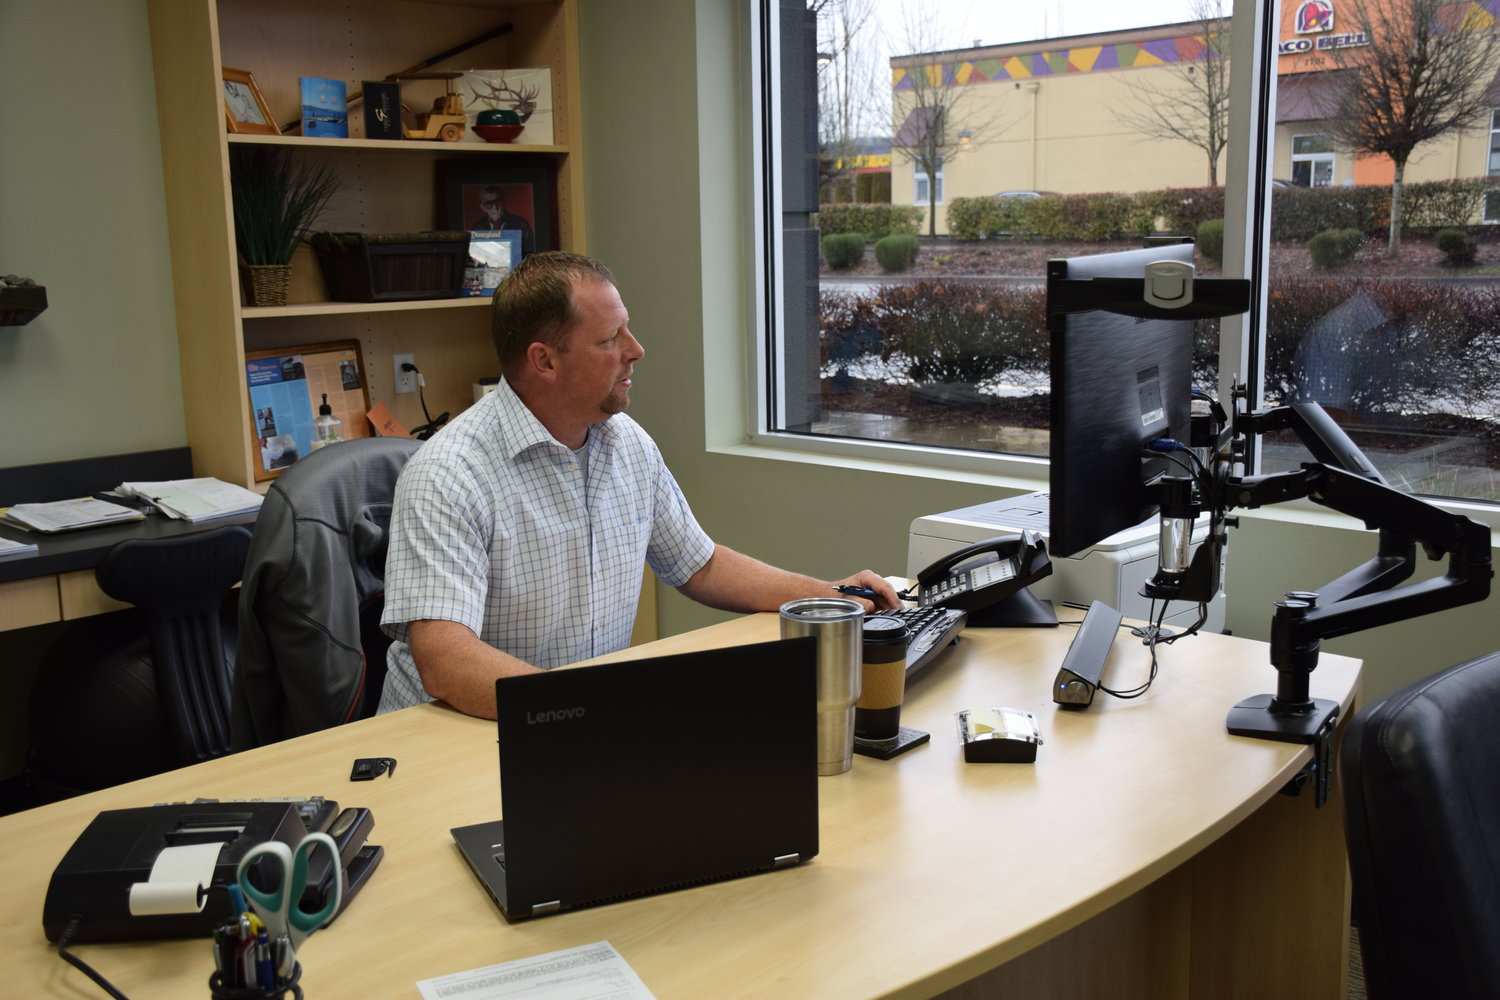 Elite Collision Center President Kevin Morse works at his office. Fifteen years into the business he says they were in a good place both geographically with Battle Ground’s mix of urban and rural and with a business formula that has made them successful.